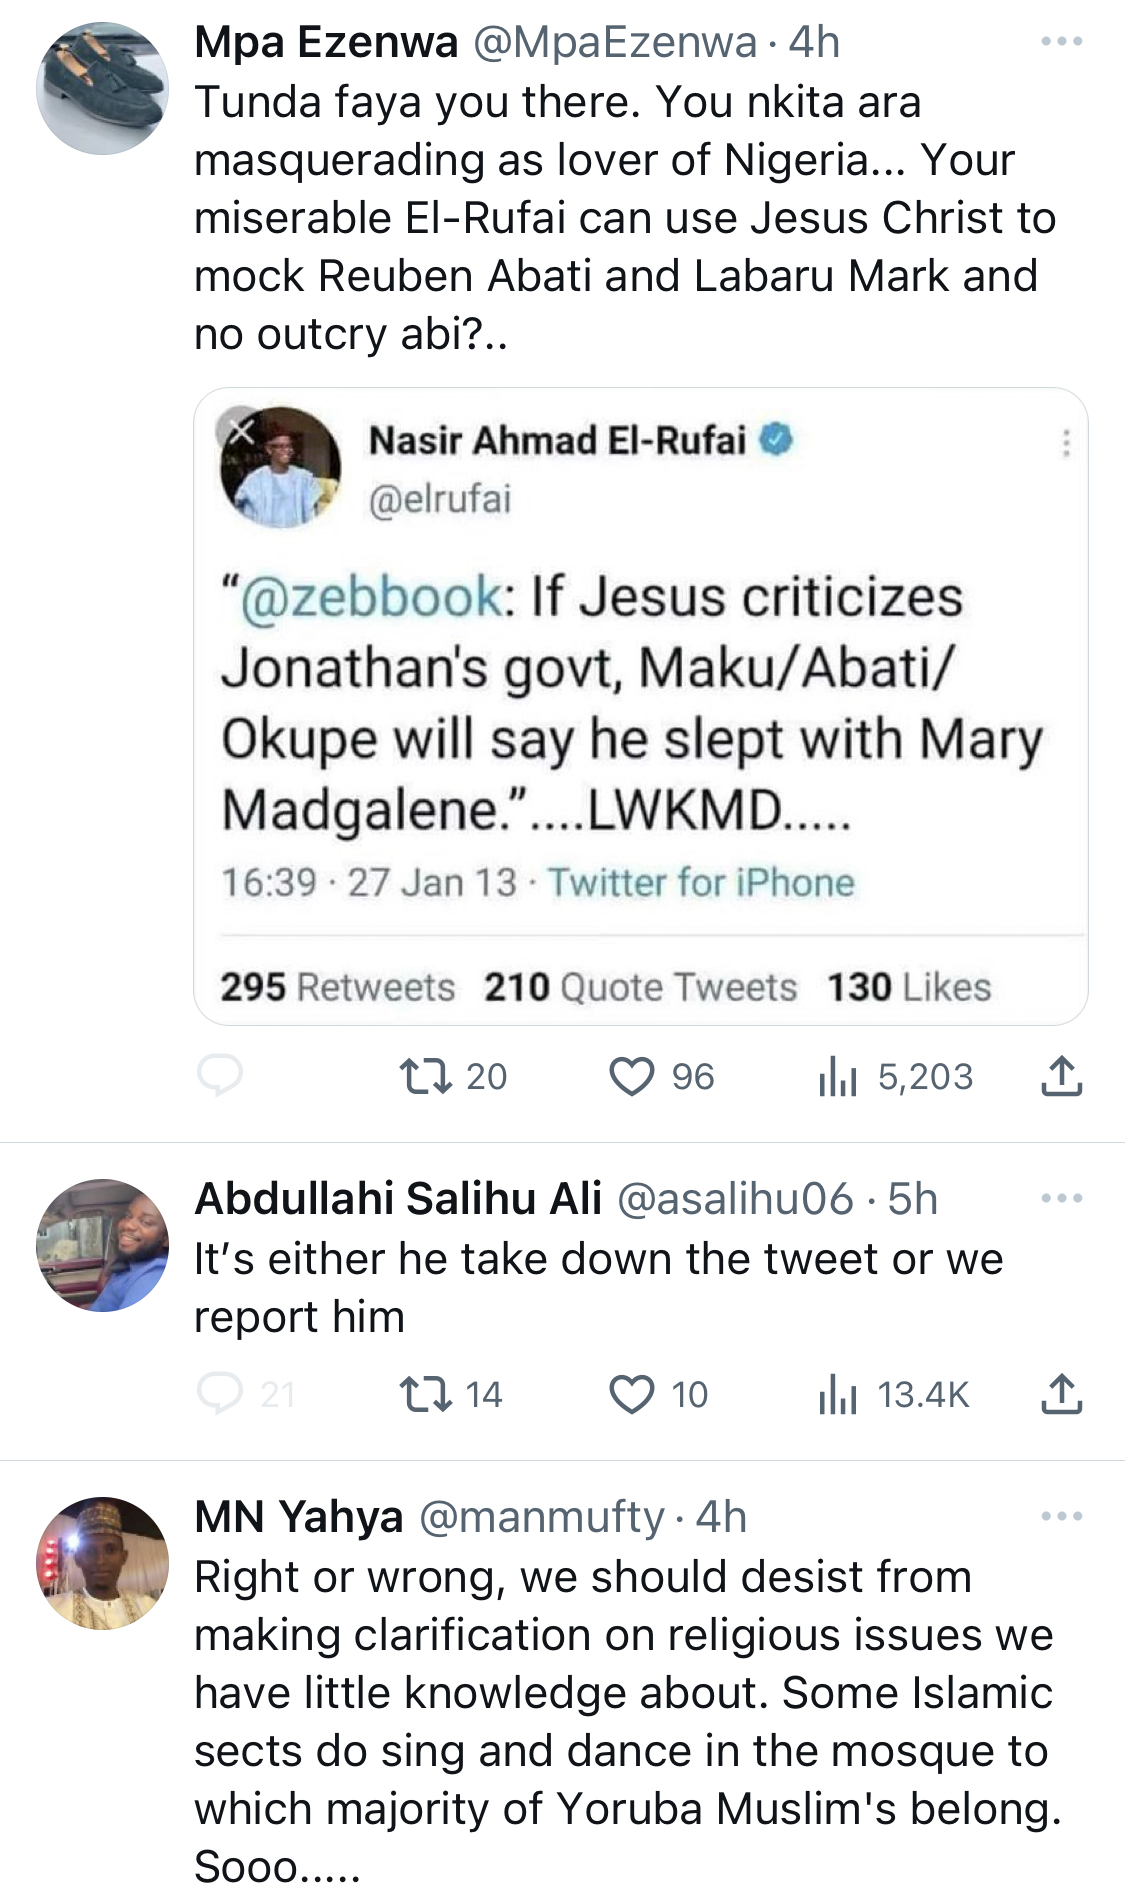 Every Muslim finds this offensive - Ex-Buhari aide Bashir tells Davido as he faces backlash for promoting video with Islamic prayer [photos]